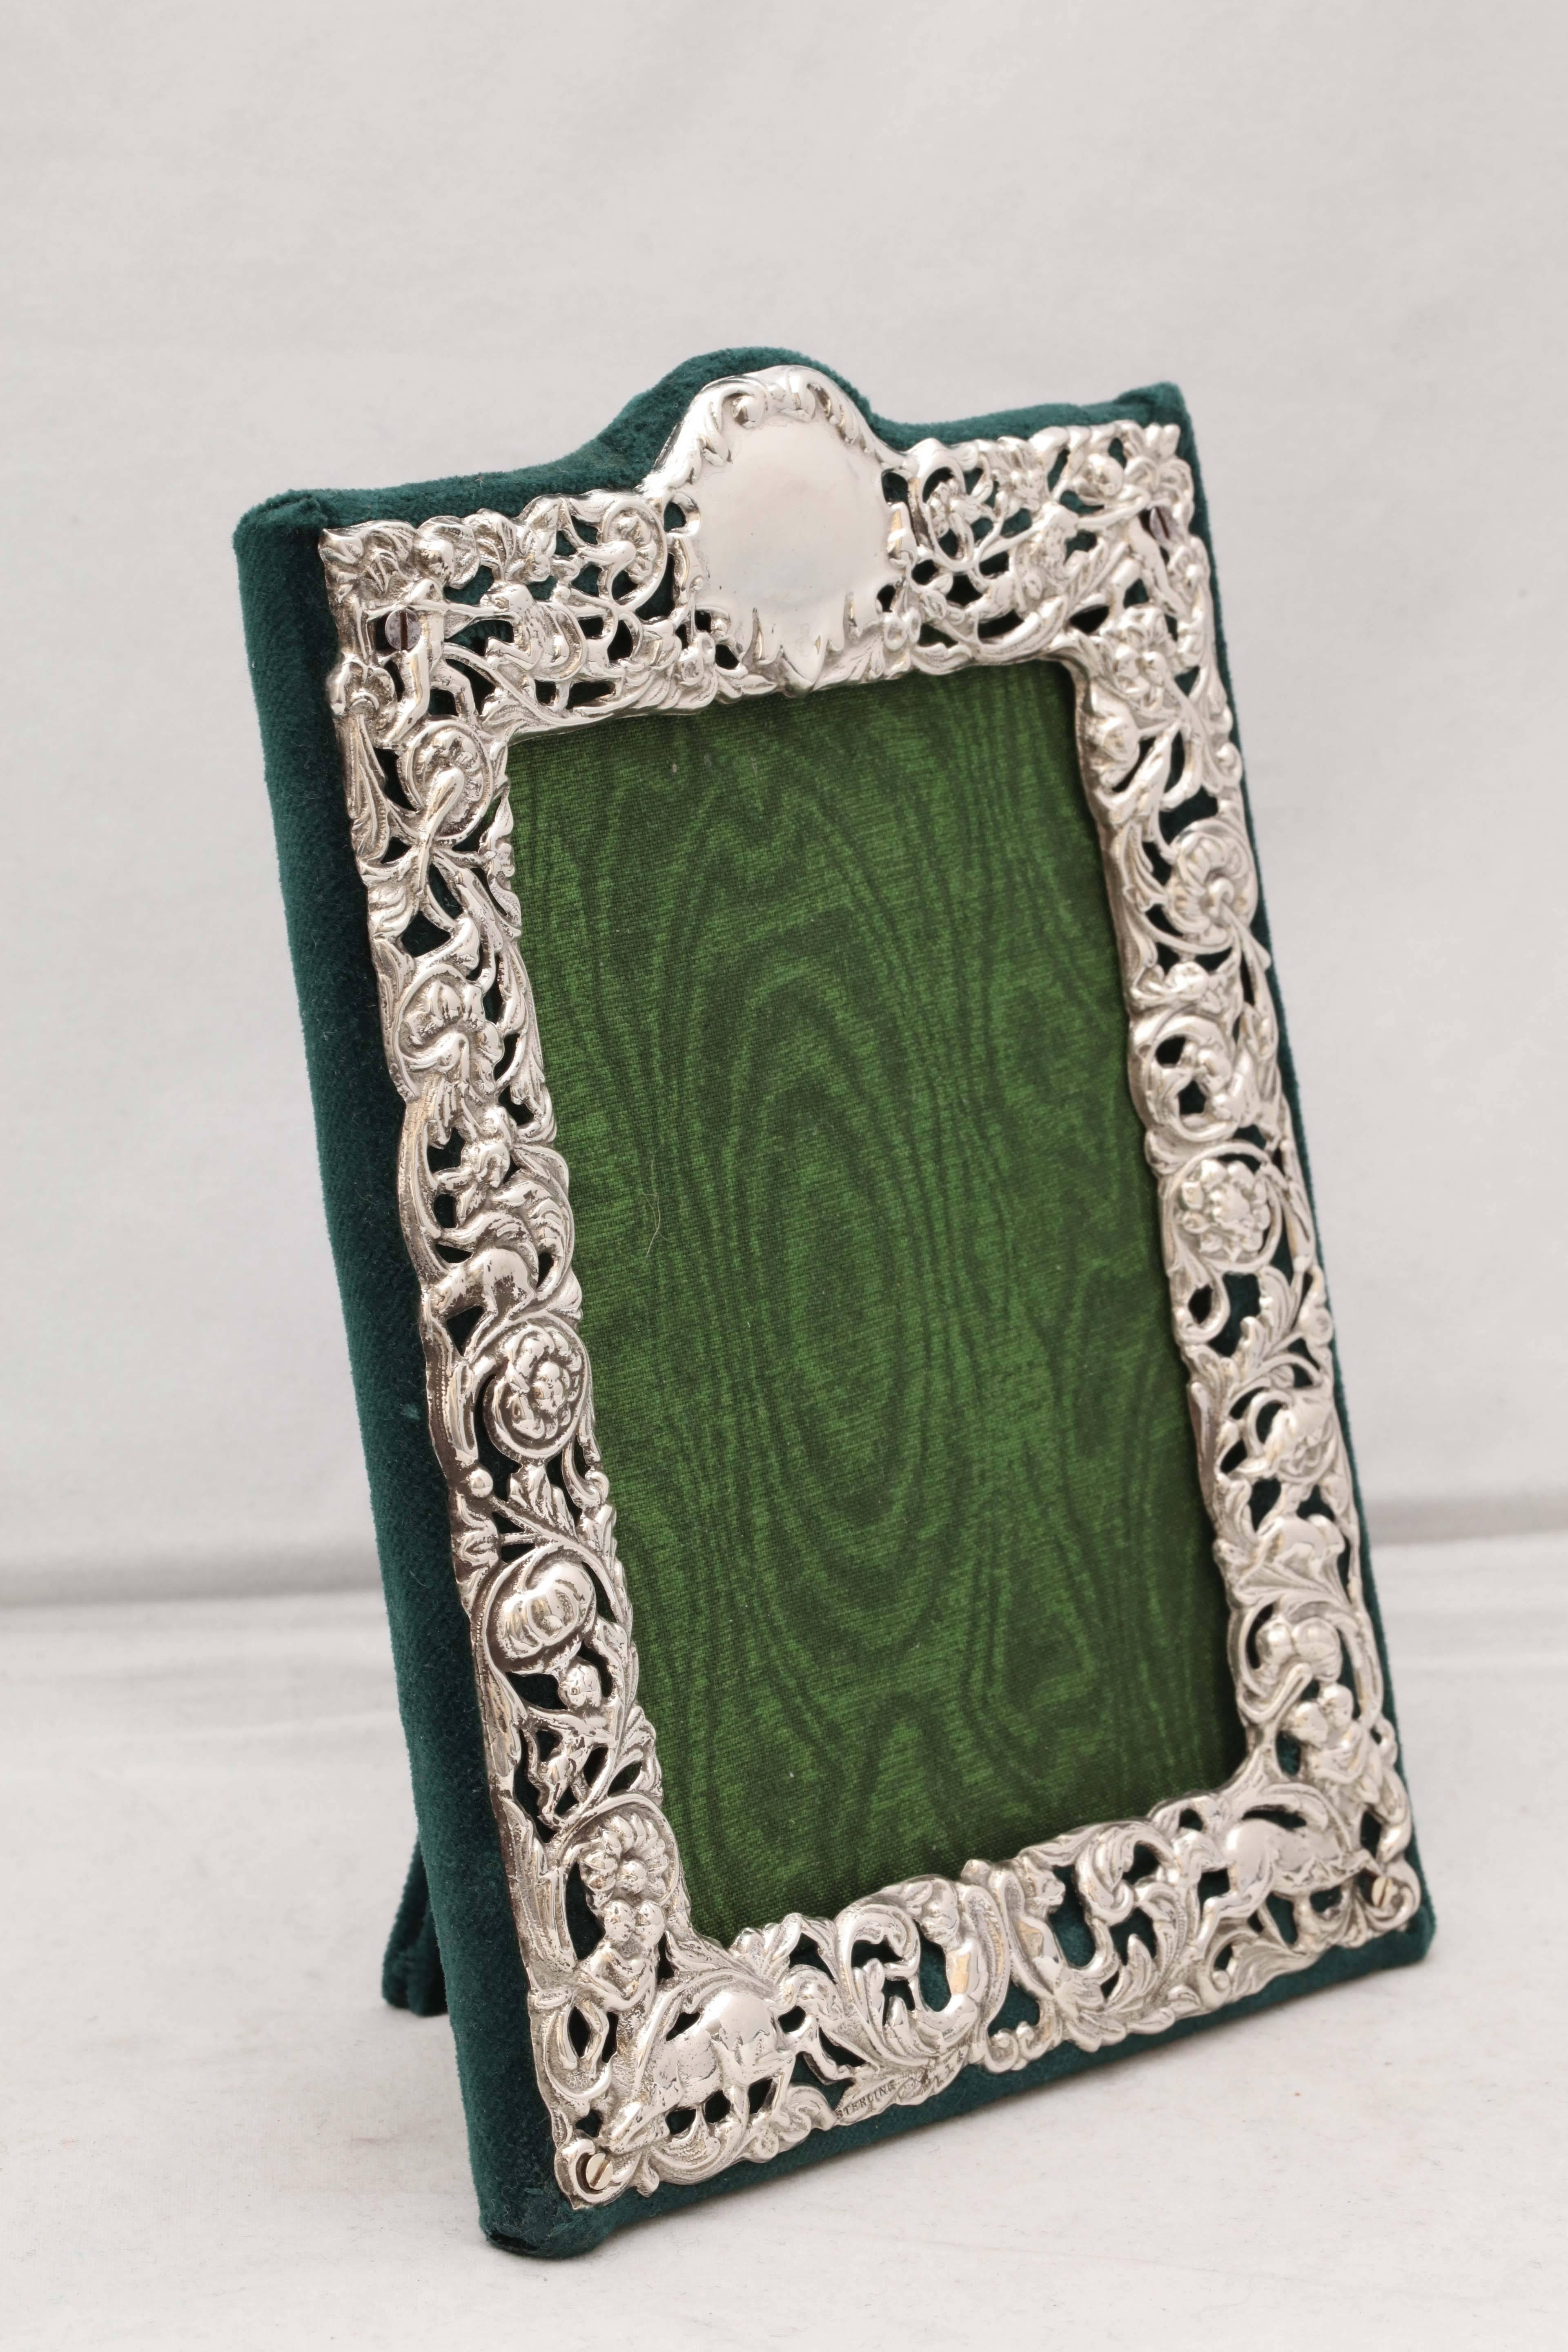 Victorian, sterling silver picture frame, Dominick & Haff, New York, circa 1895. Lovely pierced work, depicting flowers (there are two horses on either side of the bottom), allows the dark green velvet to show through. Vacant cartouche. Measures: 7